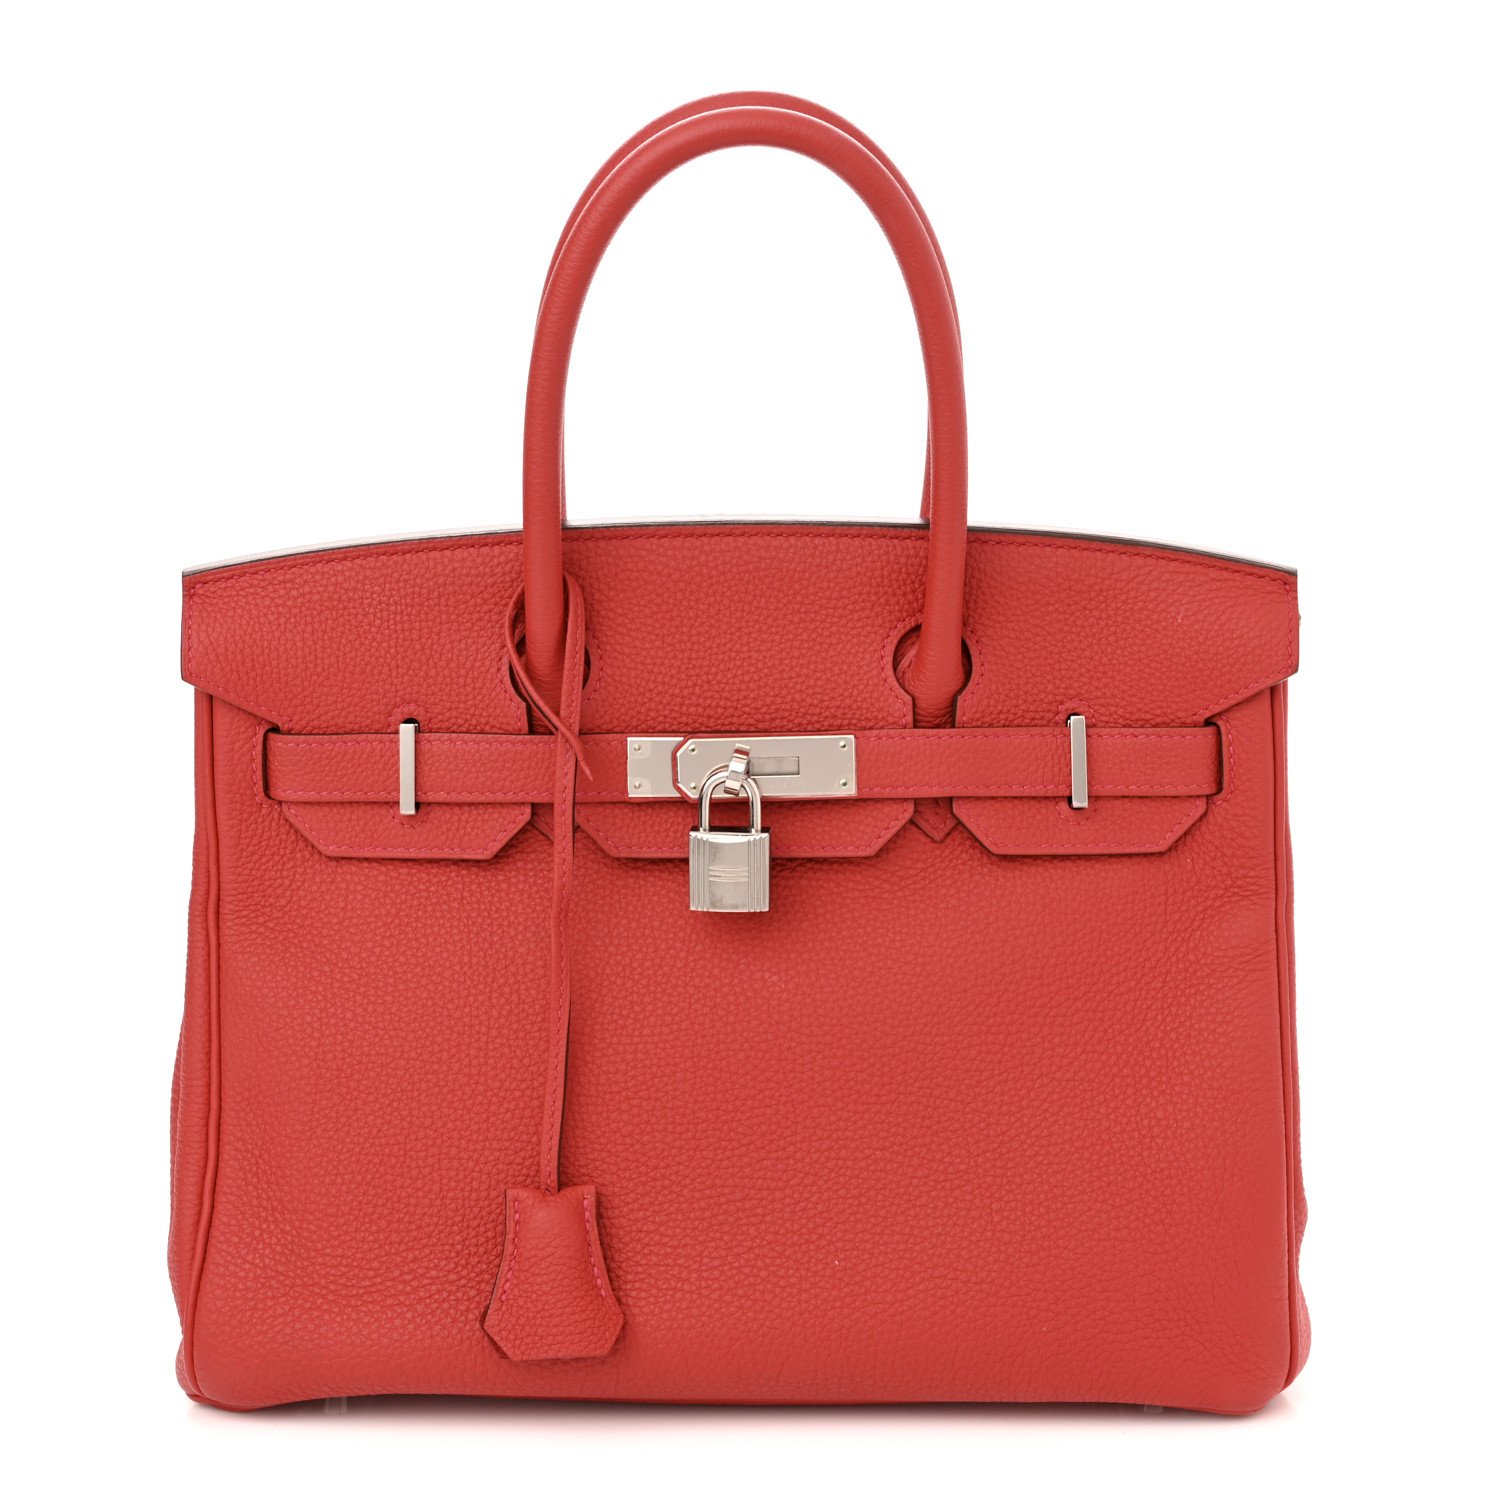 ✨Ultra-Rare✨ This Baby Birkin features two beautiful colors in